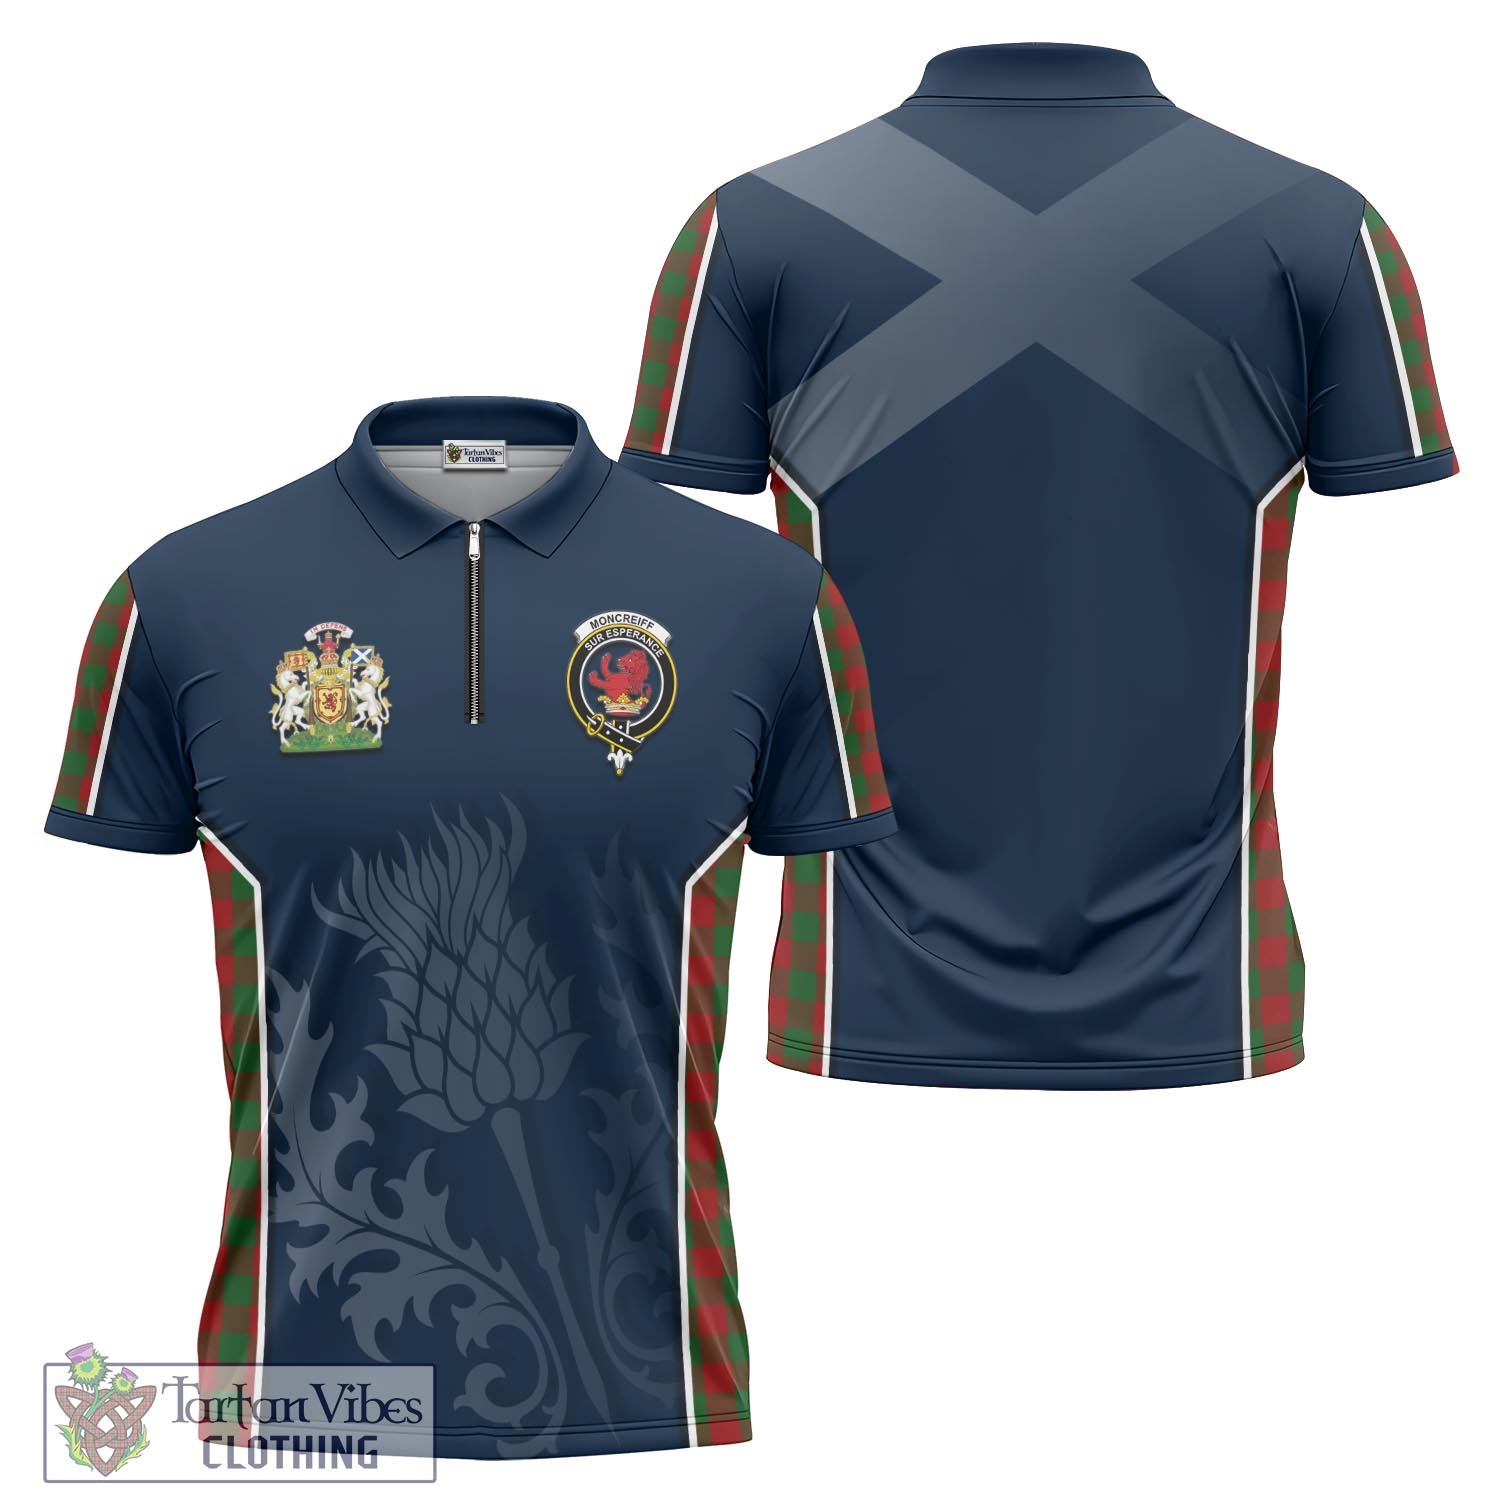 Tartan Vibes Clothing Moncrieff Tartan Zipper Polo Shirt with Family Crest and Scottish Thistle Vibes Sport Style